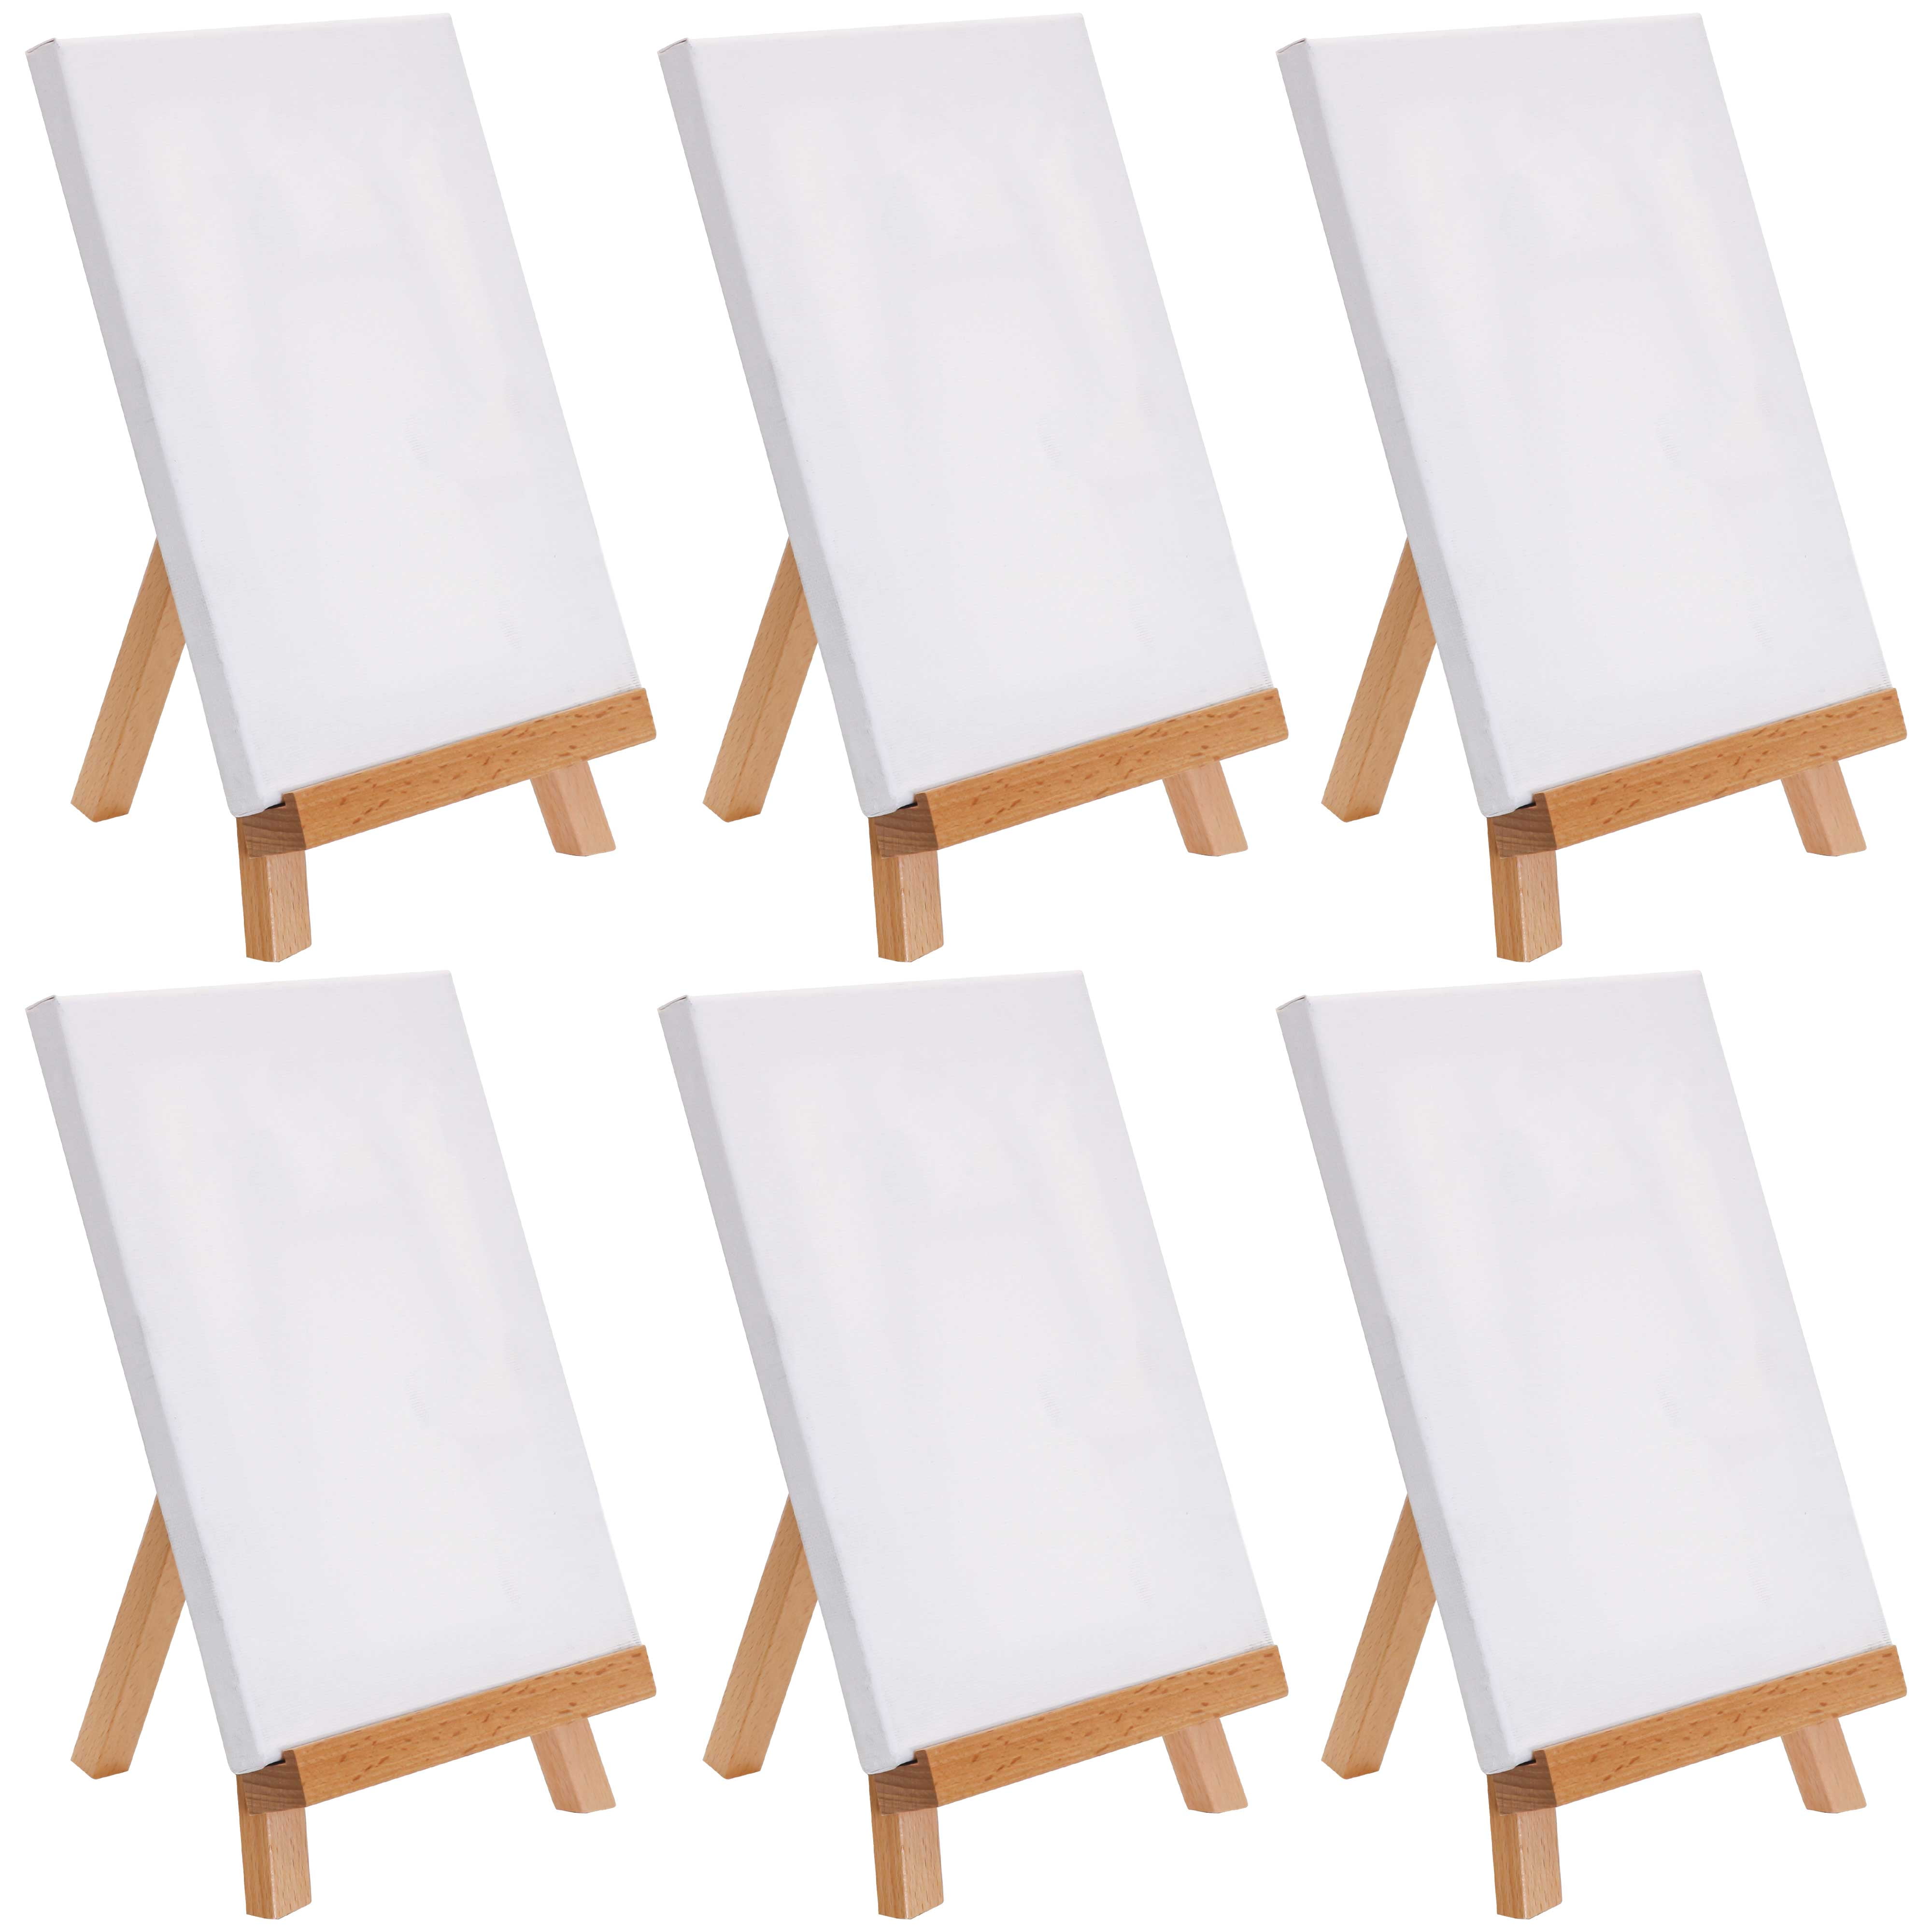 20x20cm Canvas and Wooden Easel Set – Evercarts